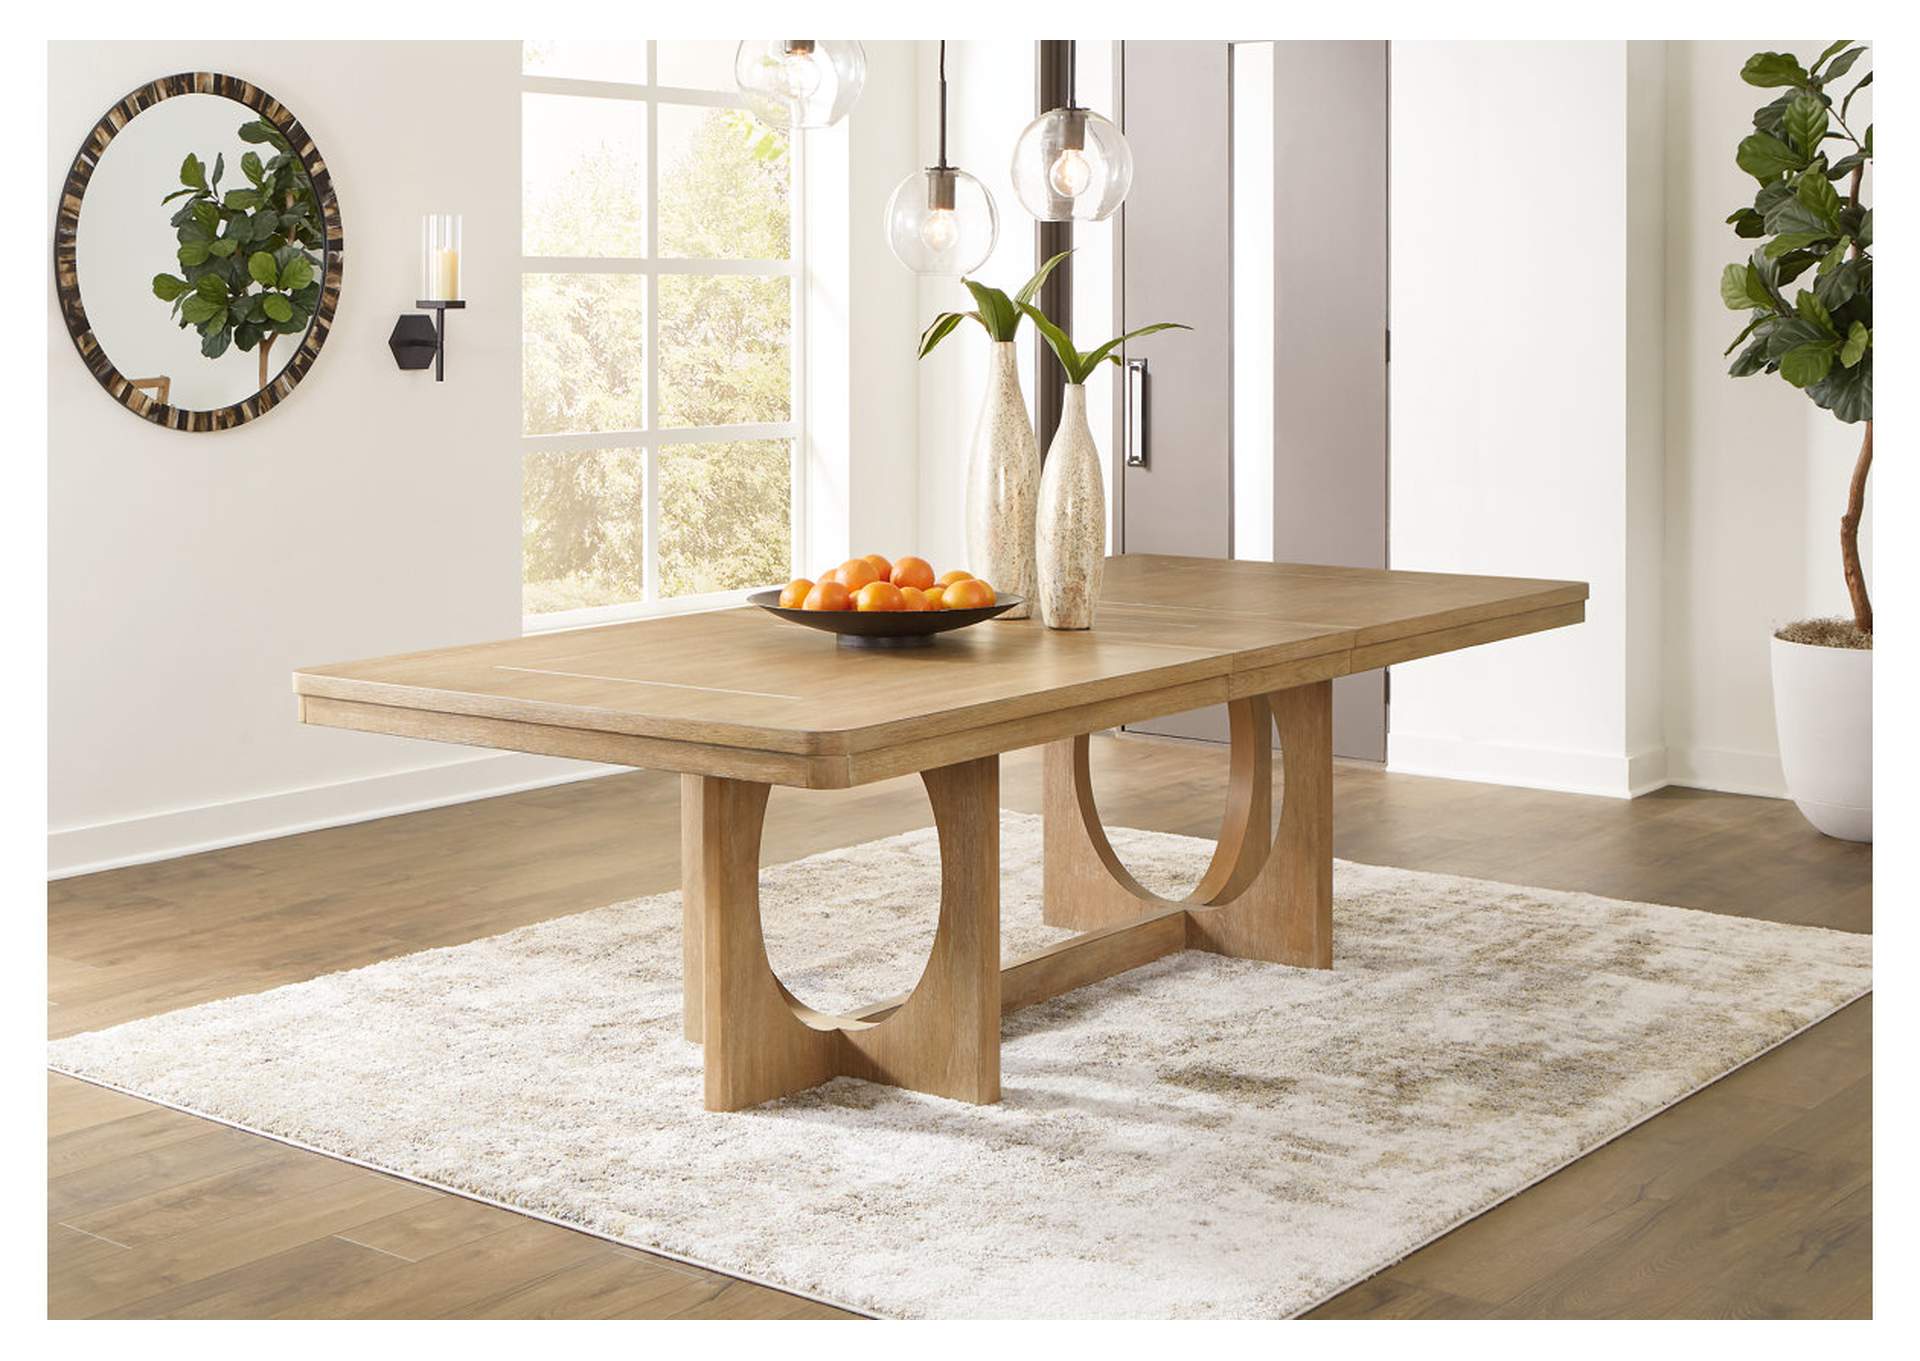 Rencott Dining Extension Table,Ashley